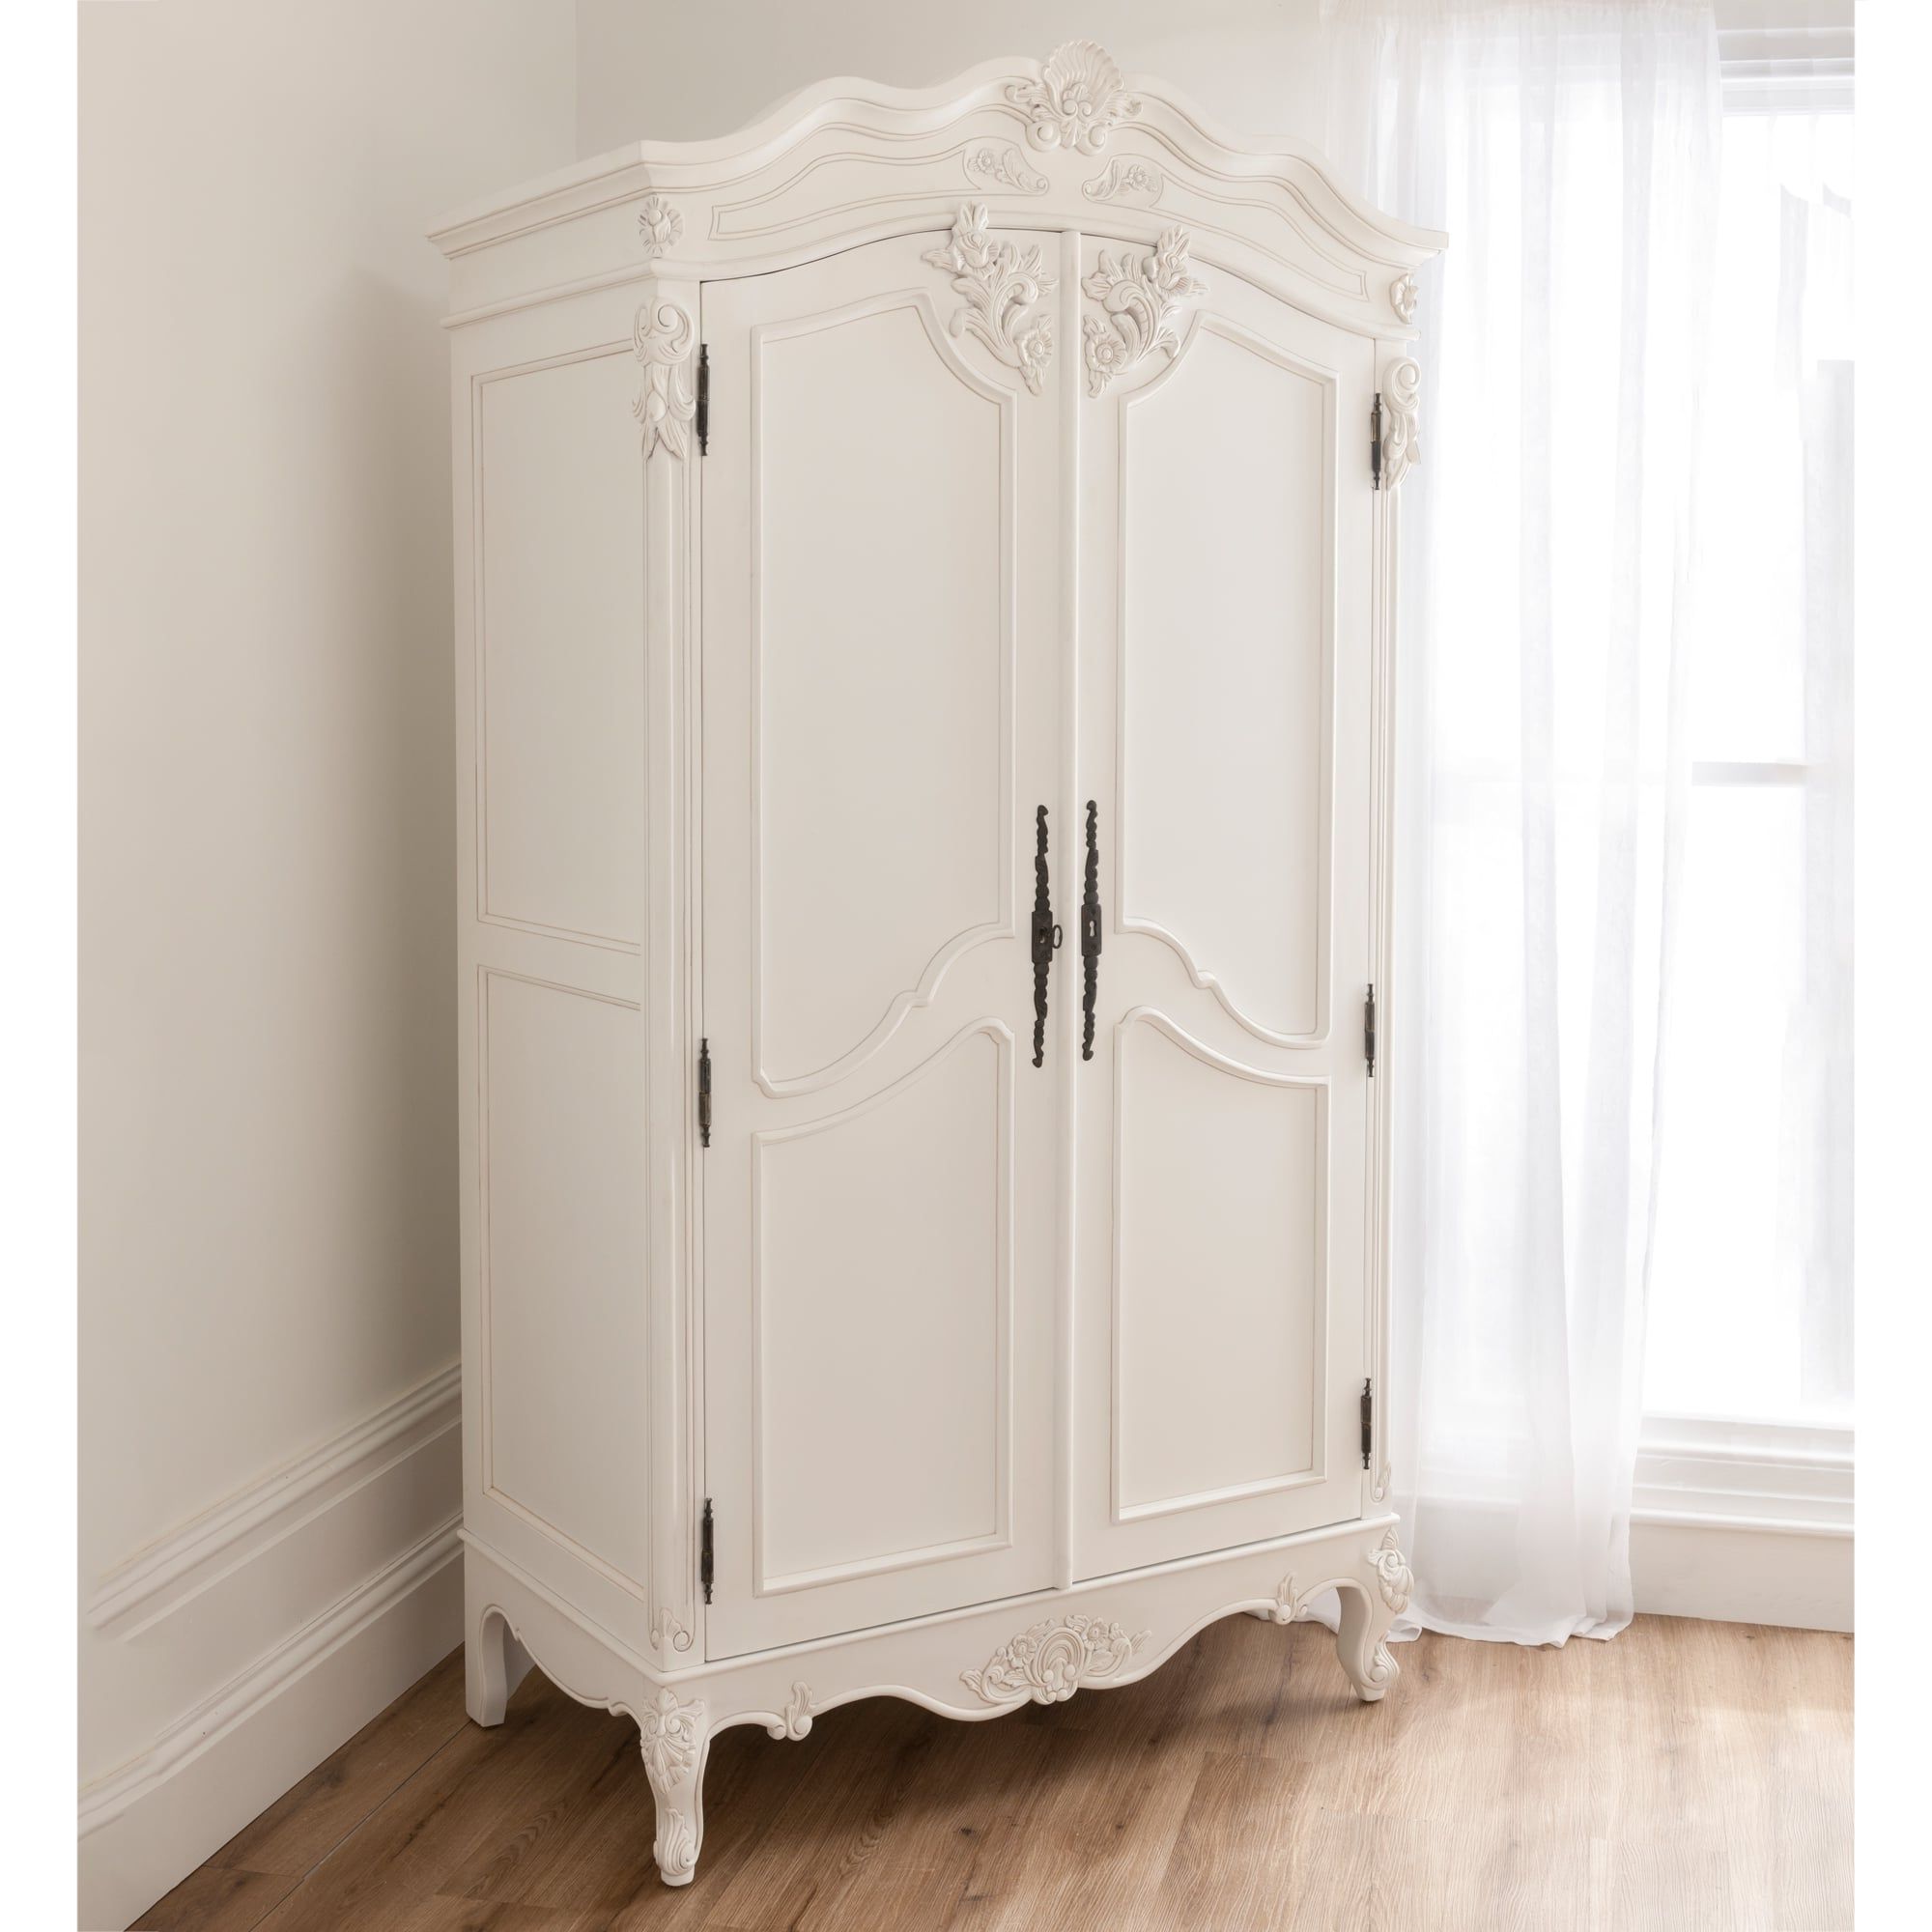 Baroque Antique French Wardrobe Is Available Online At Homesdirect365 Pertaining To Cheap French Style Wardrobes (Gallery 2 of 20)